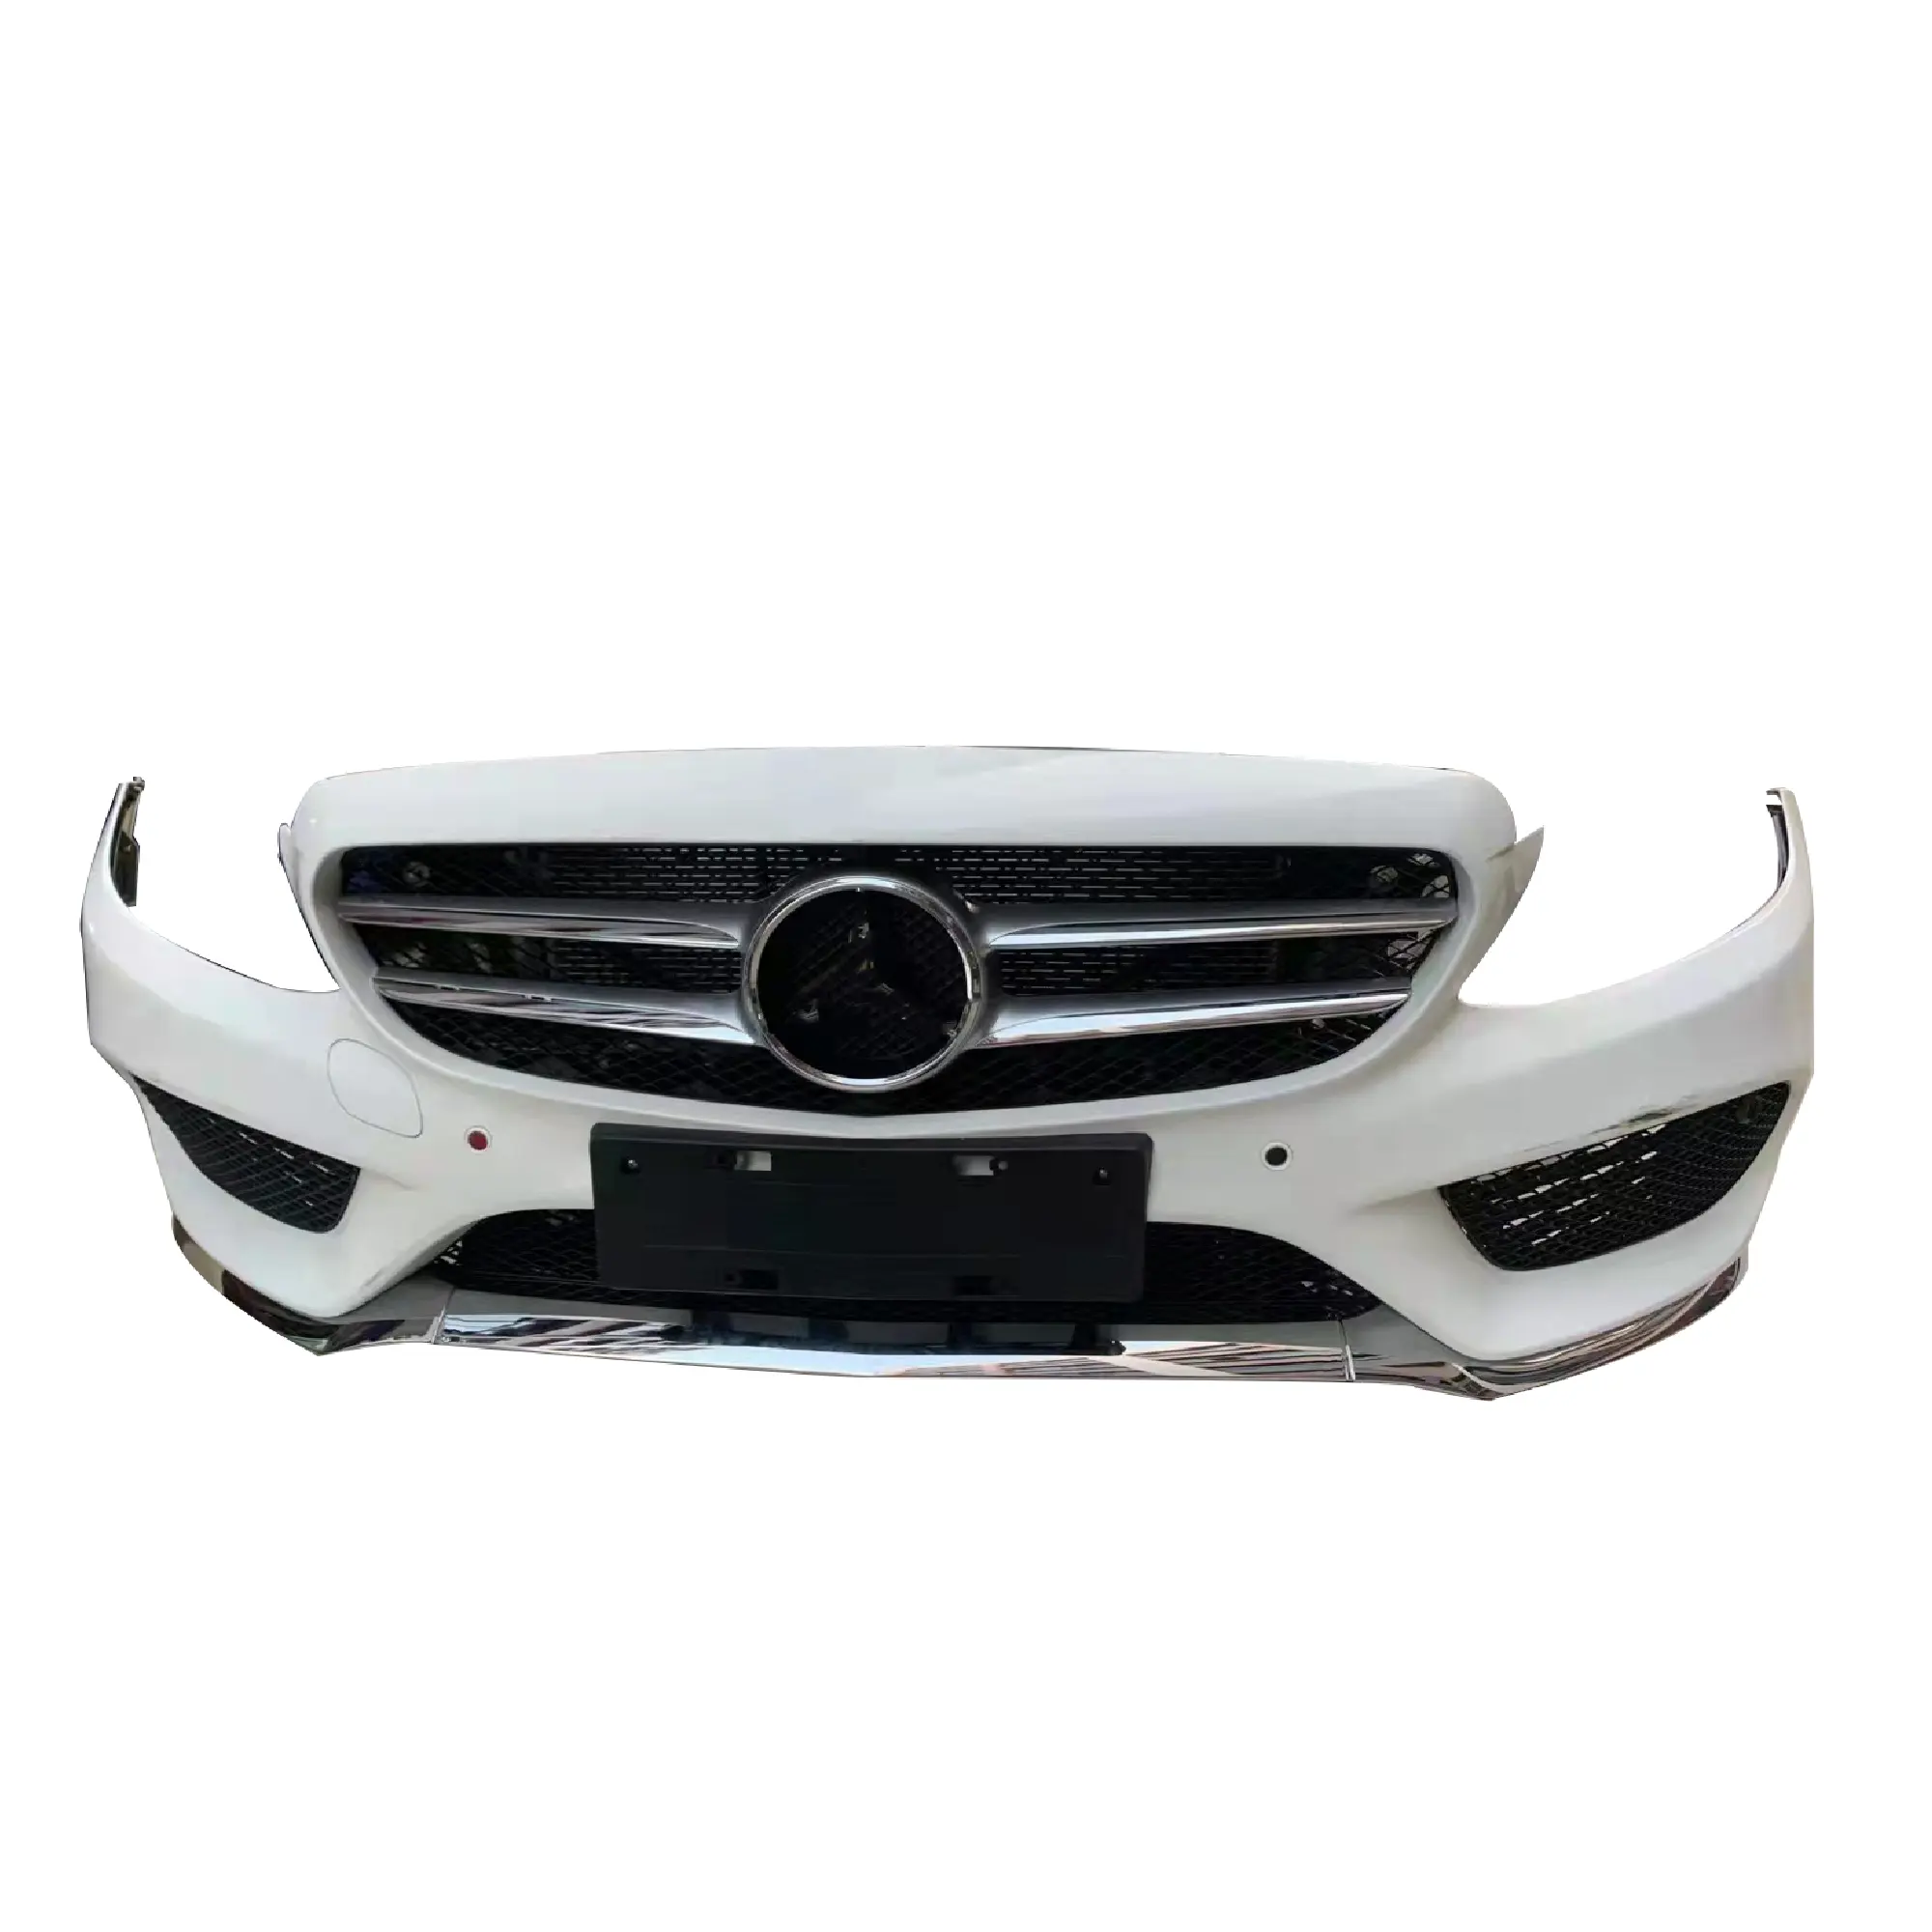 Front Bumper for w205 Body kit grille grill bumper set for Mercedes Benz W205 bodykit C180 C200 C260 C300 2015-2019